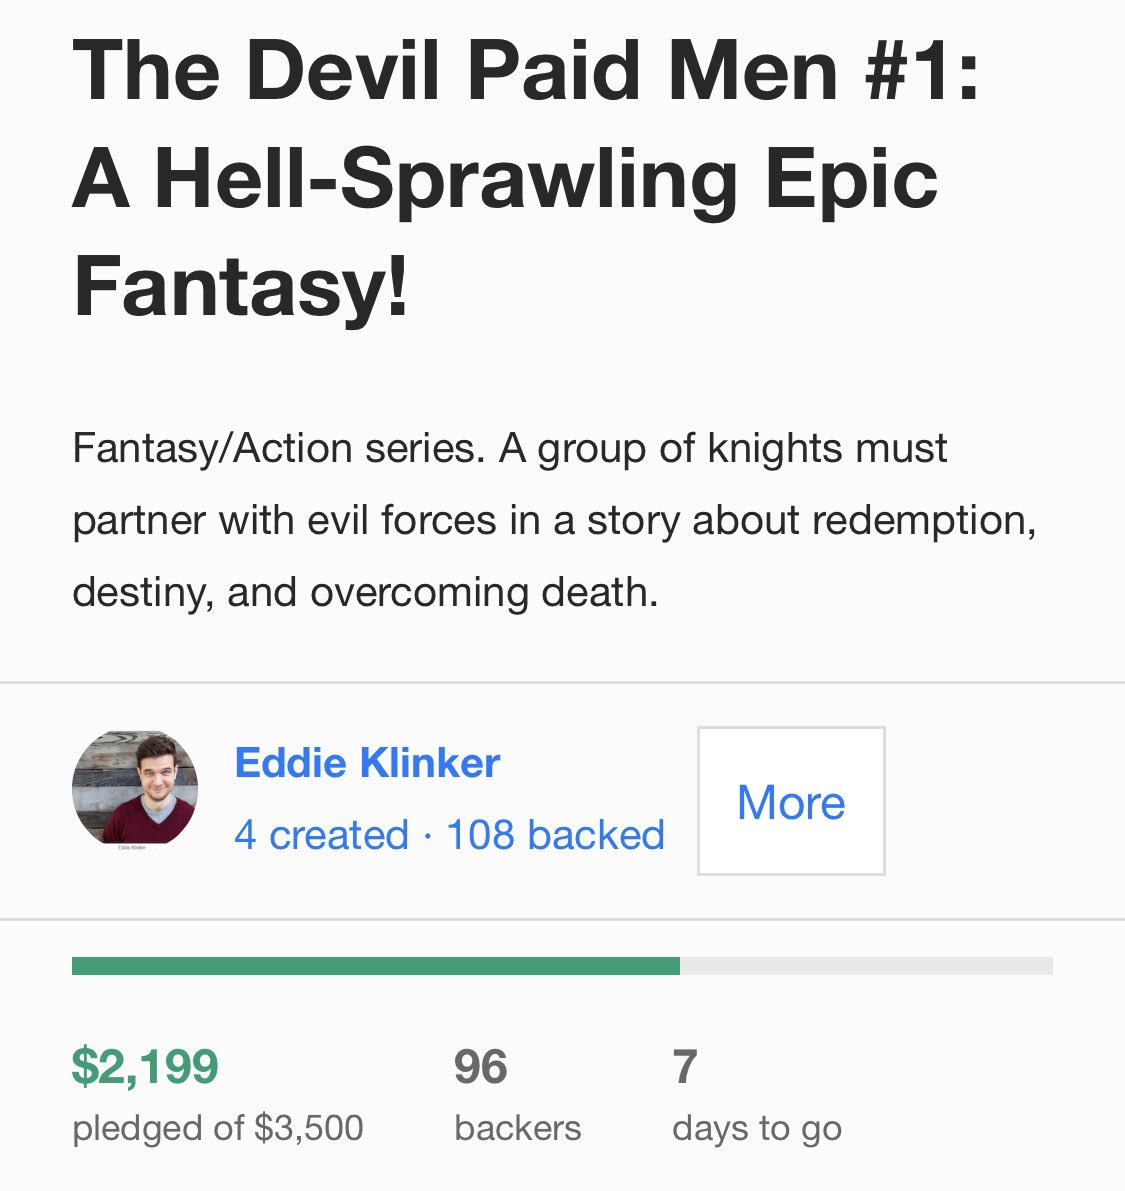 We had a great day yesterday and hope we can keep that momentum rolling! Can we get to 100 backers by end of day?